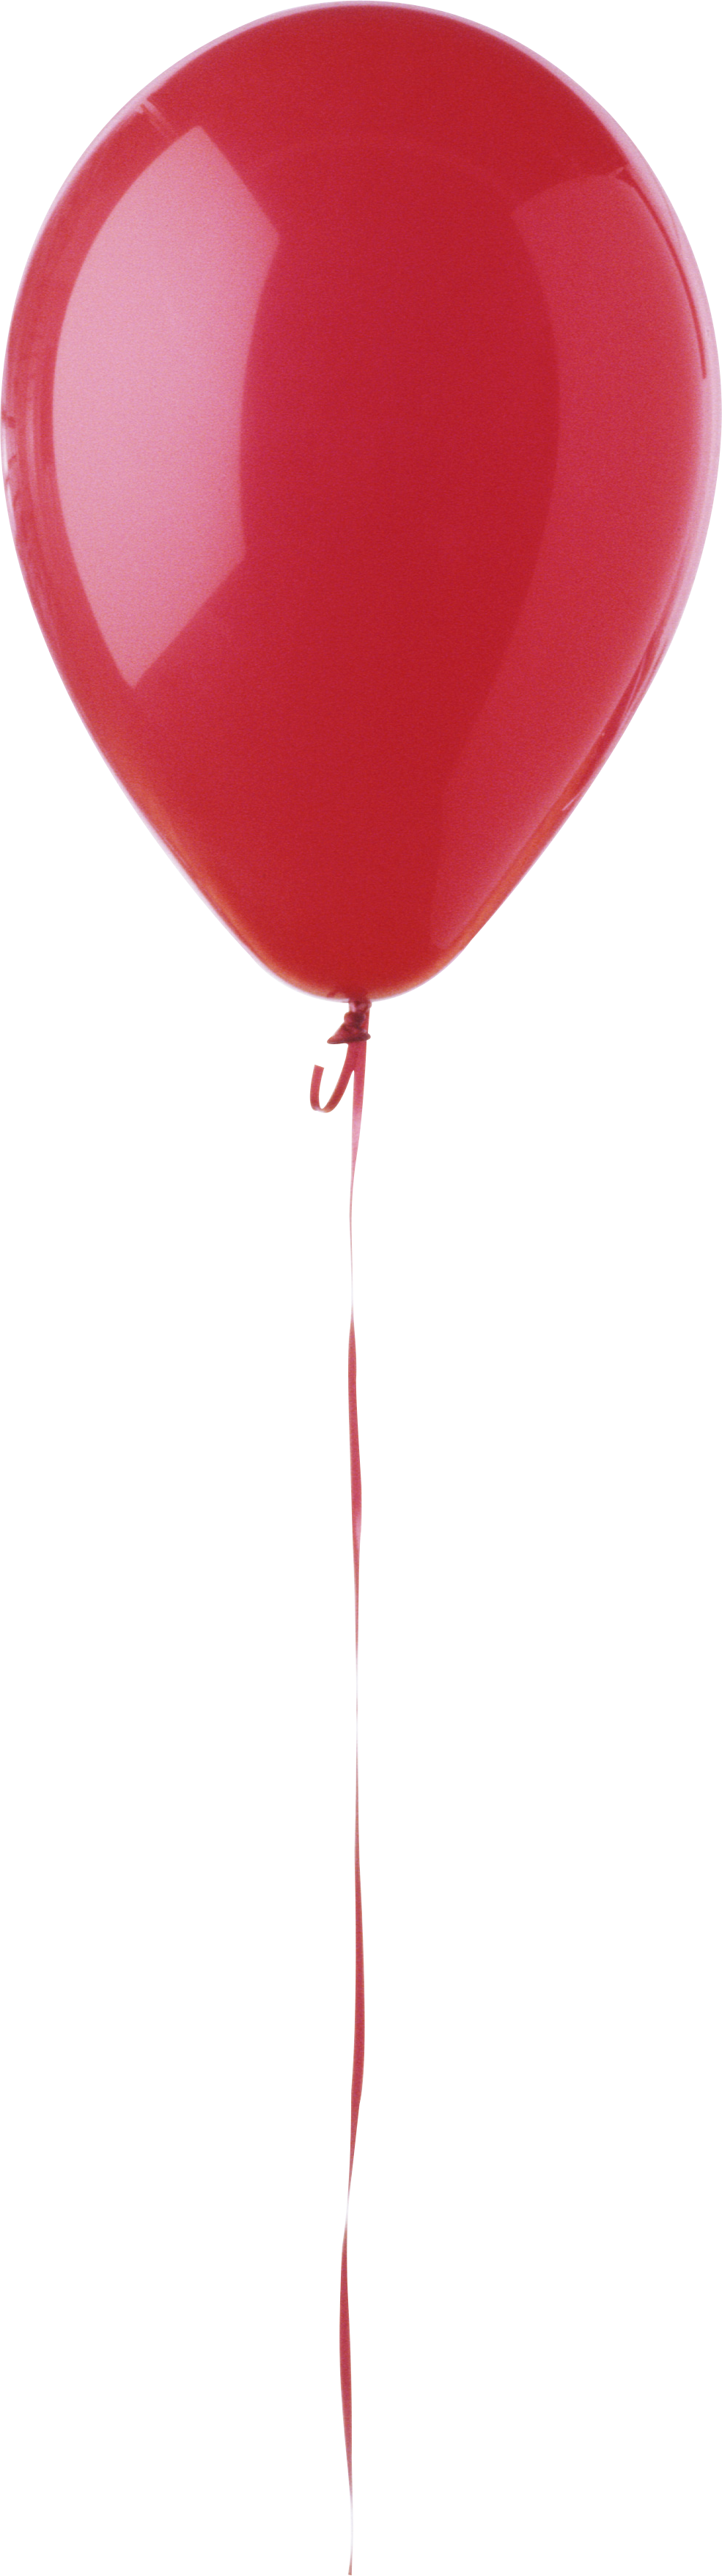 One Balloon PNG Transparent One Balloon.PNG Images. | PlusPNG